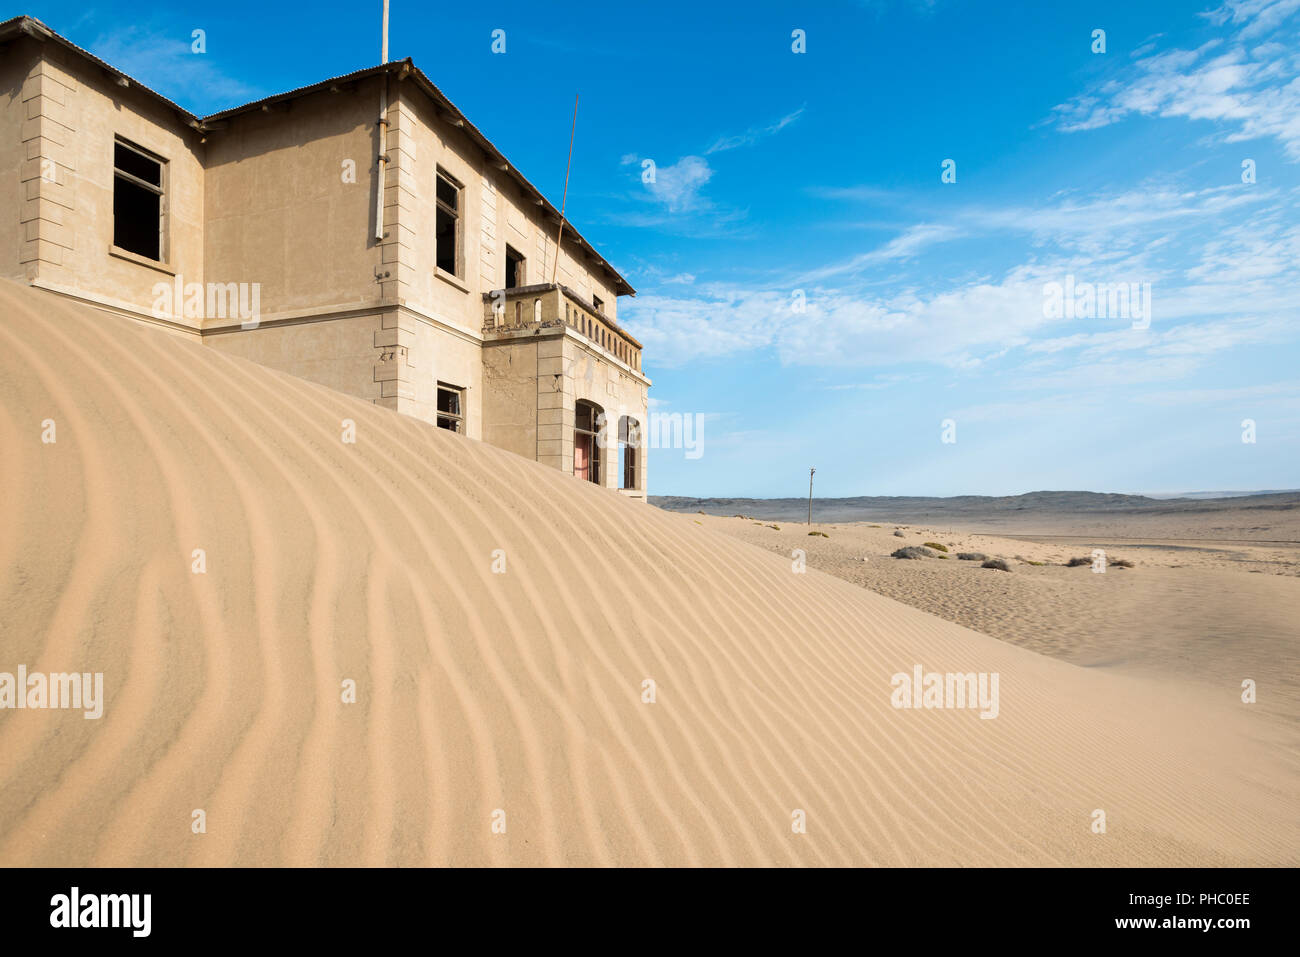 A building in the abandoned diamond mining ghost town of Kolmanskop, Namibia, Africa Stock Photo